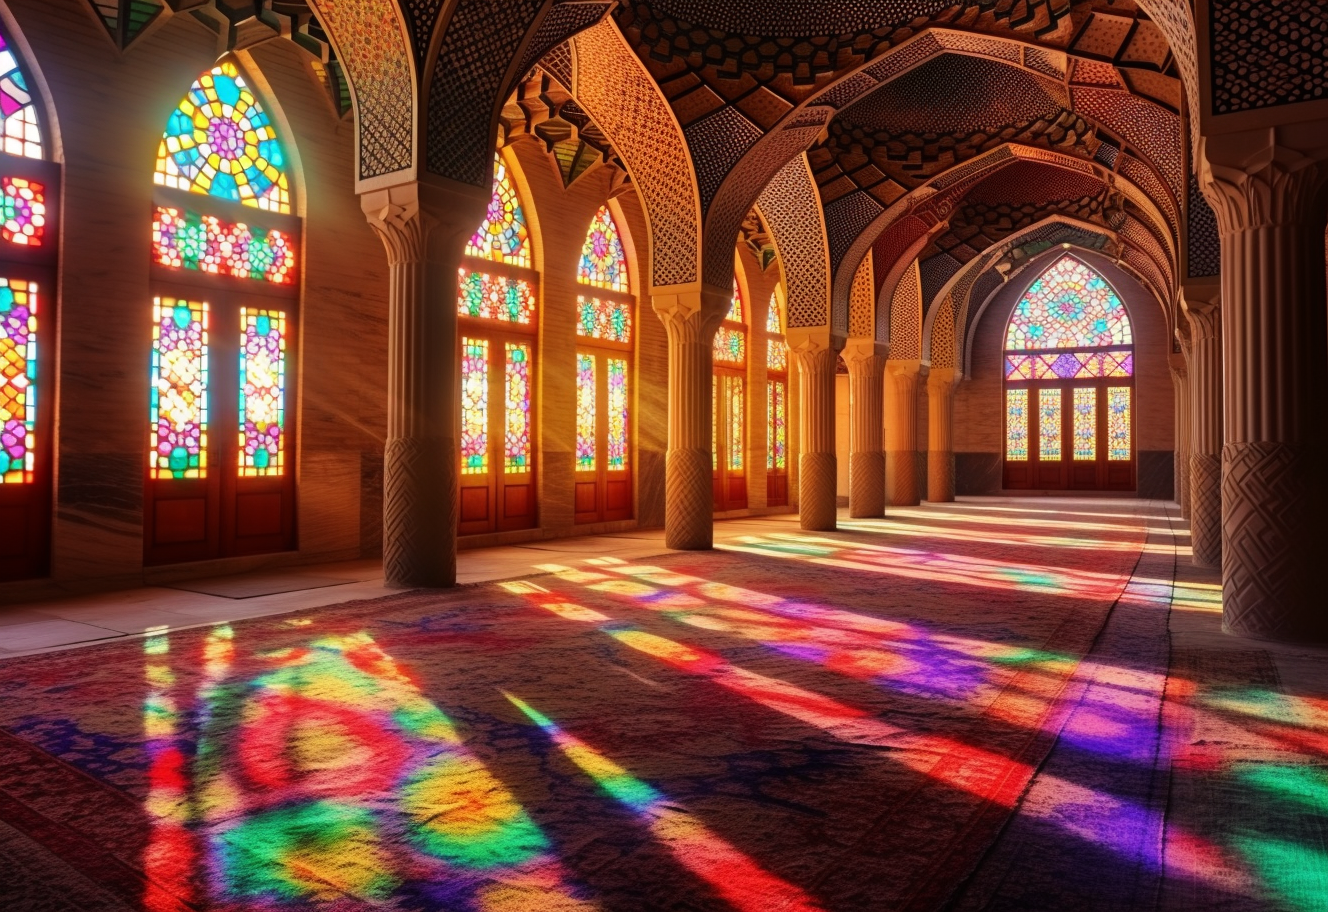 mimigreen_colorful_stained_glass_is_in_a_mosque_in_the_style_of_ed0e3548-c667-4a3e-8fbe-71e8ff65f050.png